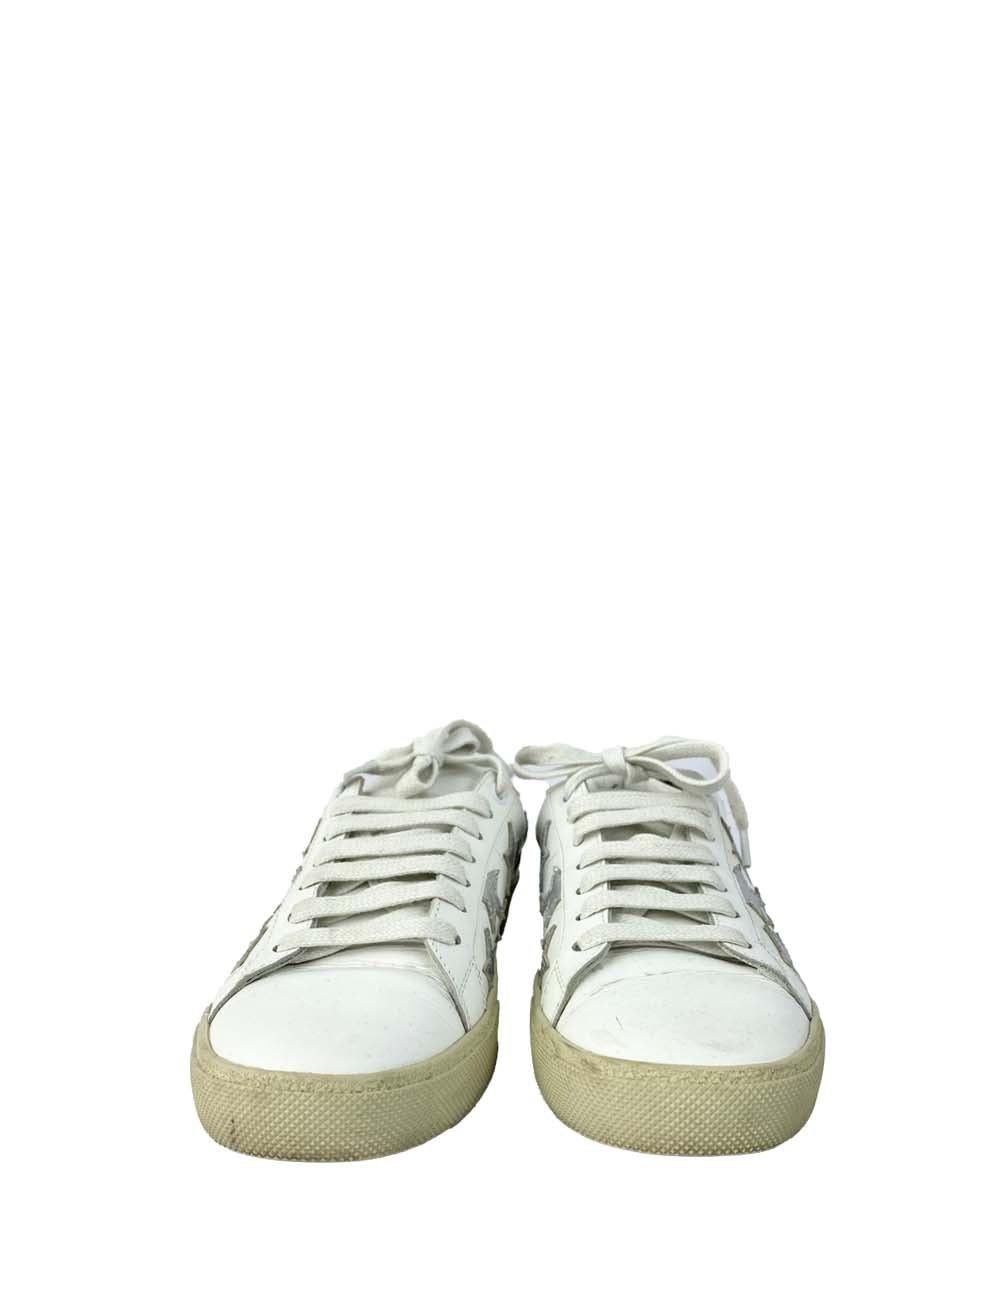 Saint Laurent white sneakers with white laces, black detail on the back and silver star detail on the sides, and a slight platform. Slight scuffing on the exterior, in otherwise great condition.

Additional information:
Material: Leather
Size: EU